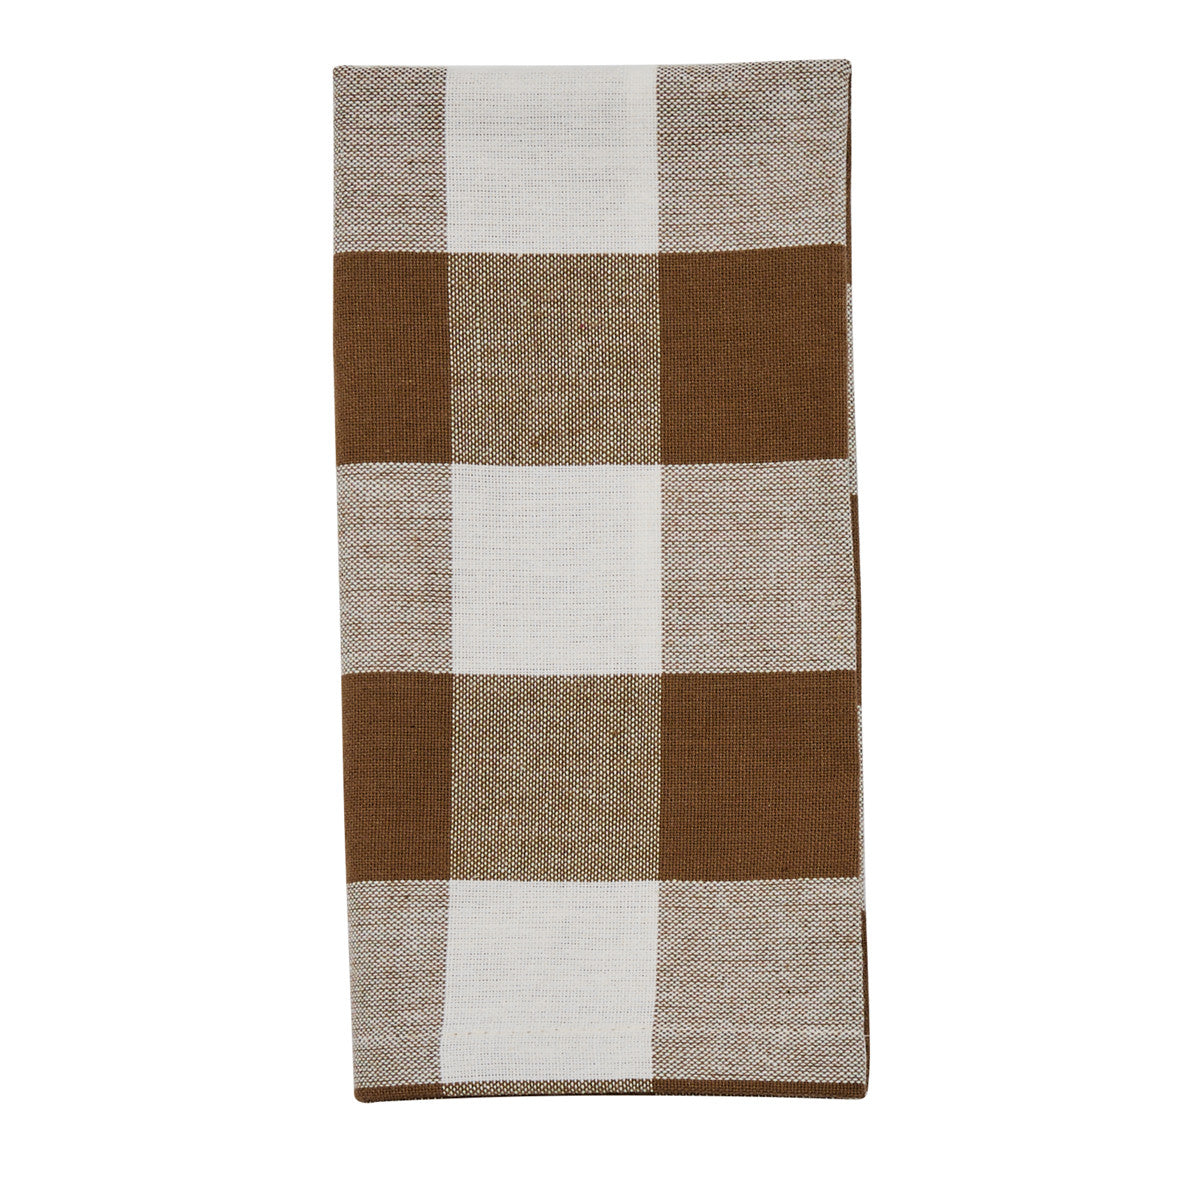 Wicklow Napkins - Brown And Cream  Set Of 12 Check  Park Designs